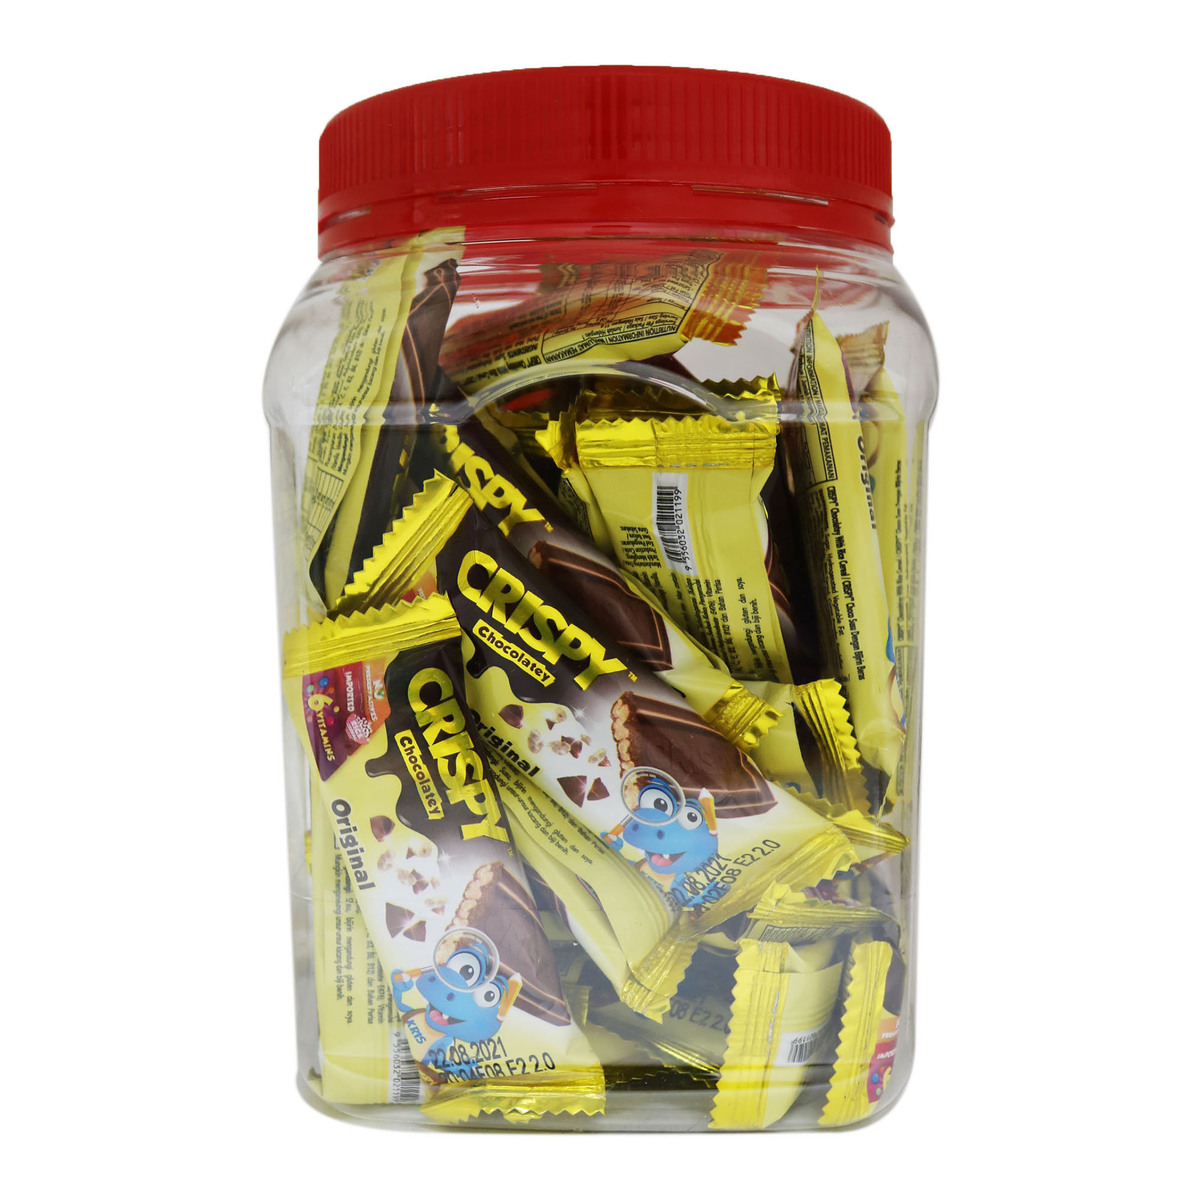 Crispy Canister Original 40 x 440g Online at Best Price | Chocolate ...